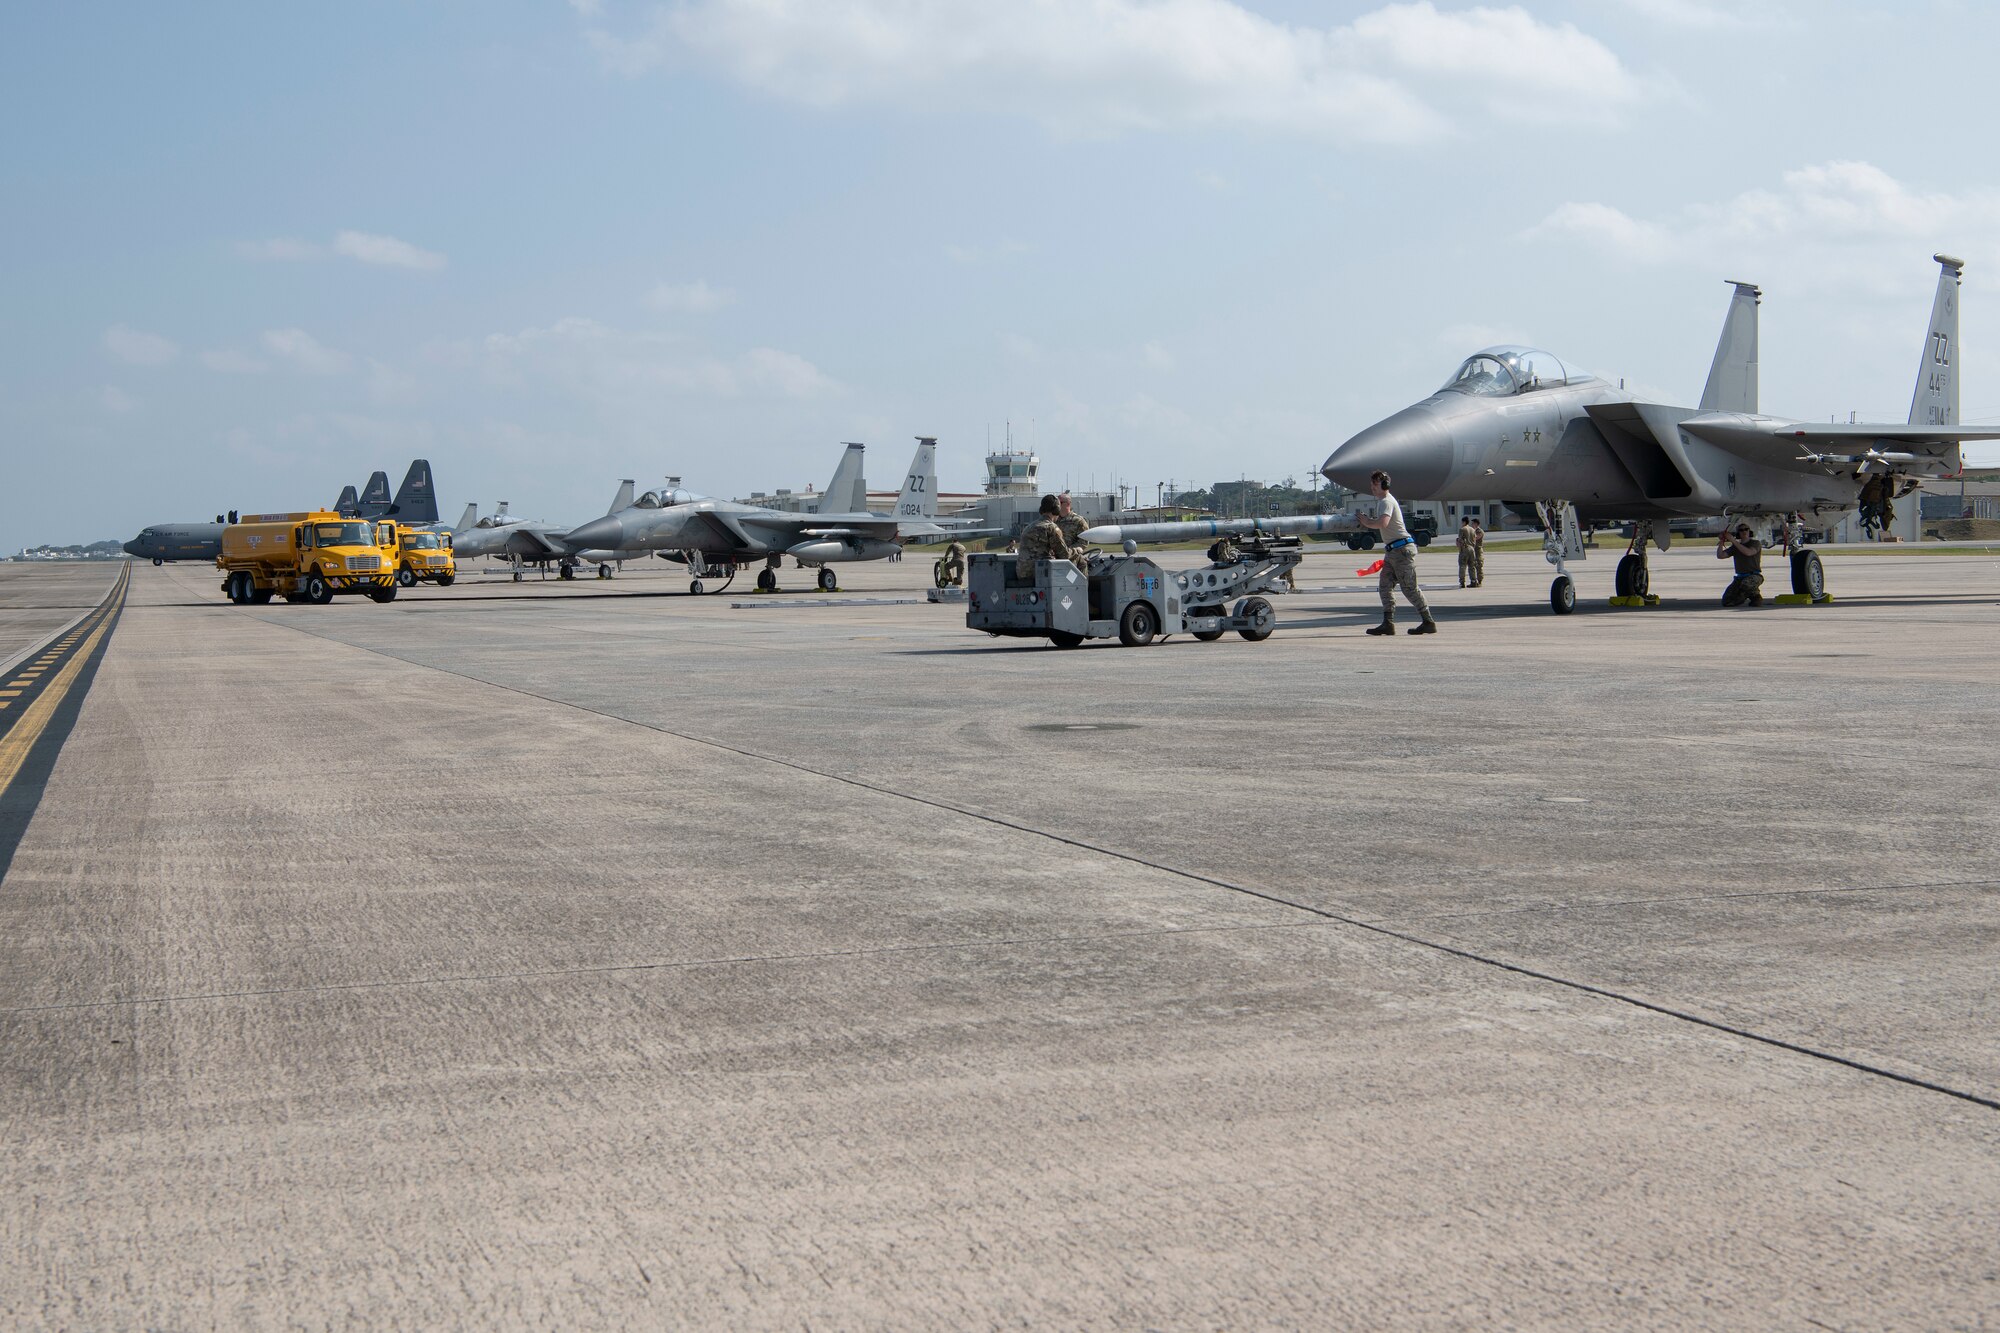 U.S. Air Force Airmen and U.S. Marines refuel and rearm F-15C Eagles, from Kadena Air Base, Japan, during an Agile Combat Employment exercise Feb. 21, 2020, at Marine Corps Air Station Futenma, Japan. Exercises that test our multi-capable Airmen and joint partners to provide munition loading and tactical refueling with minimal support are integral to employing precise ACE concept practices. (U.S. Air Force photo by Senior Airman Rhett Isbell)